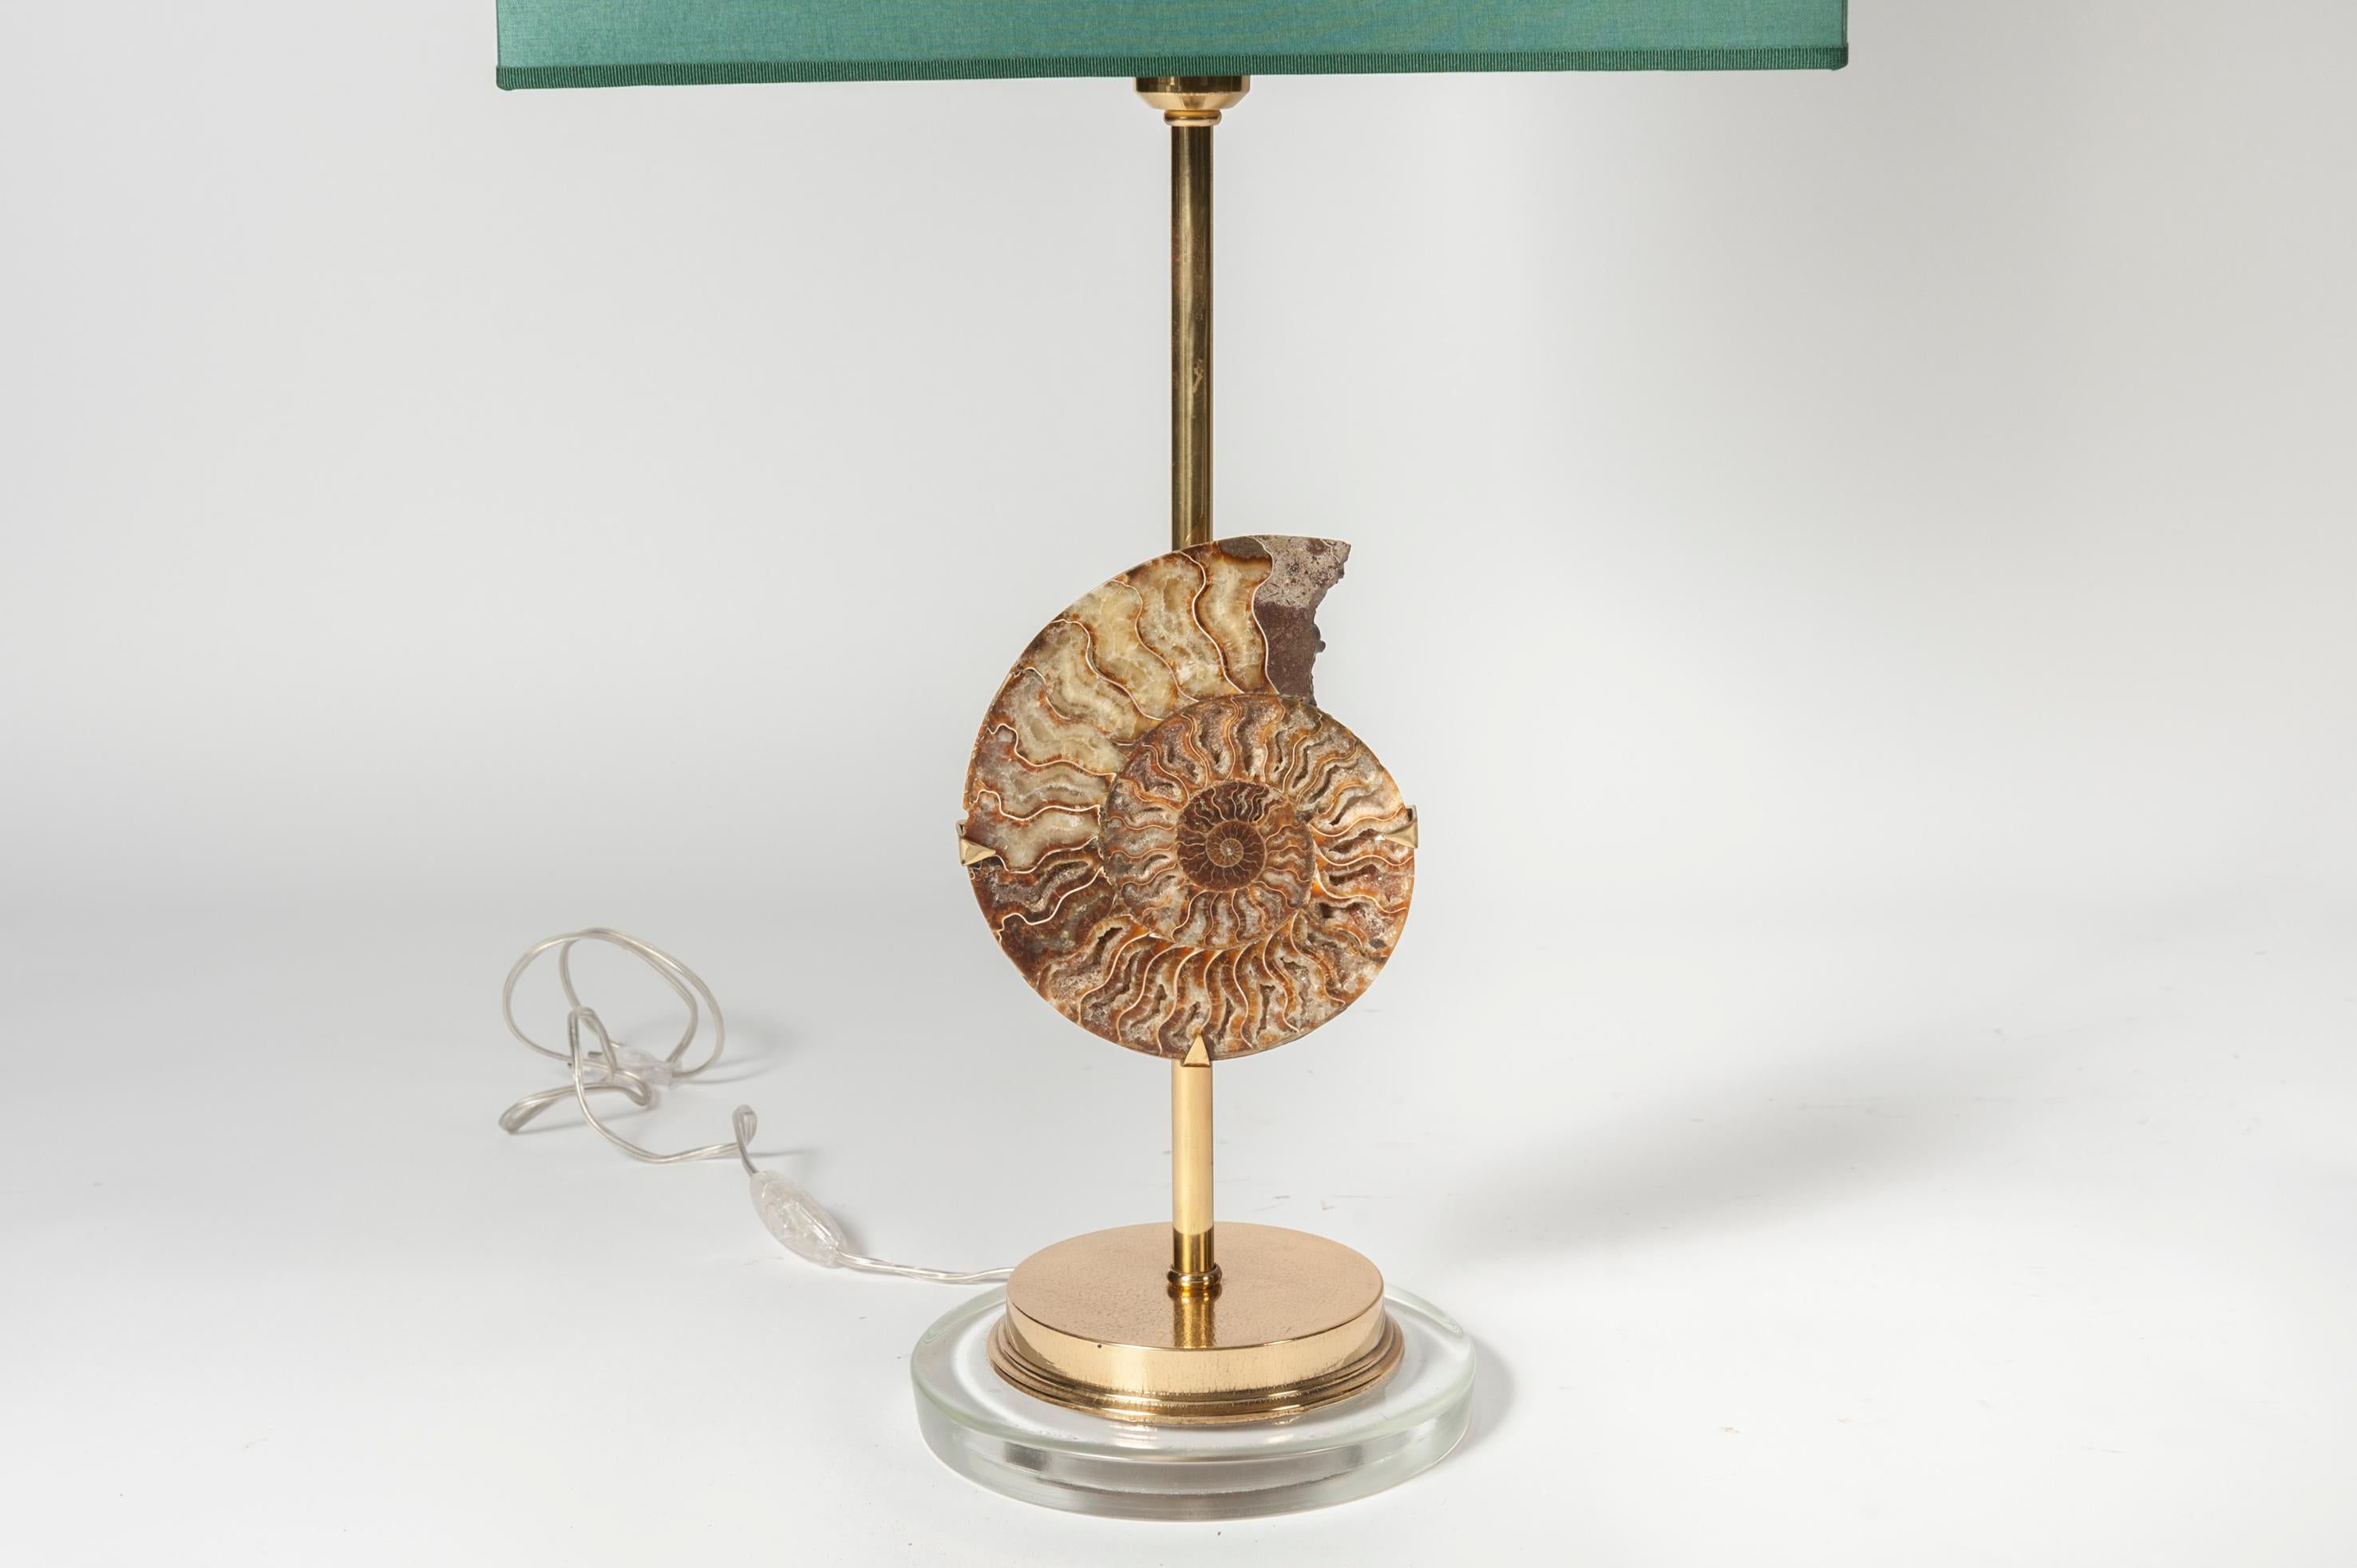 Nice pair of table lamps with petrified shell stone
No shade provided
Shade dimensions: 46 x 26 x 31.